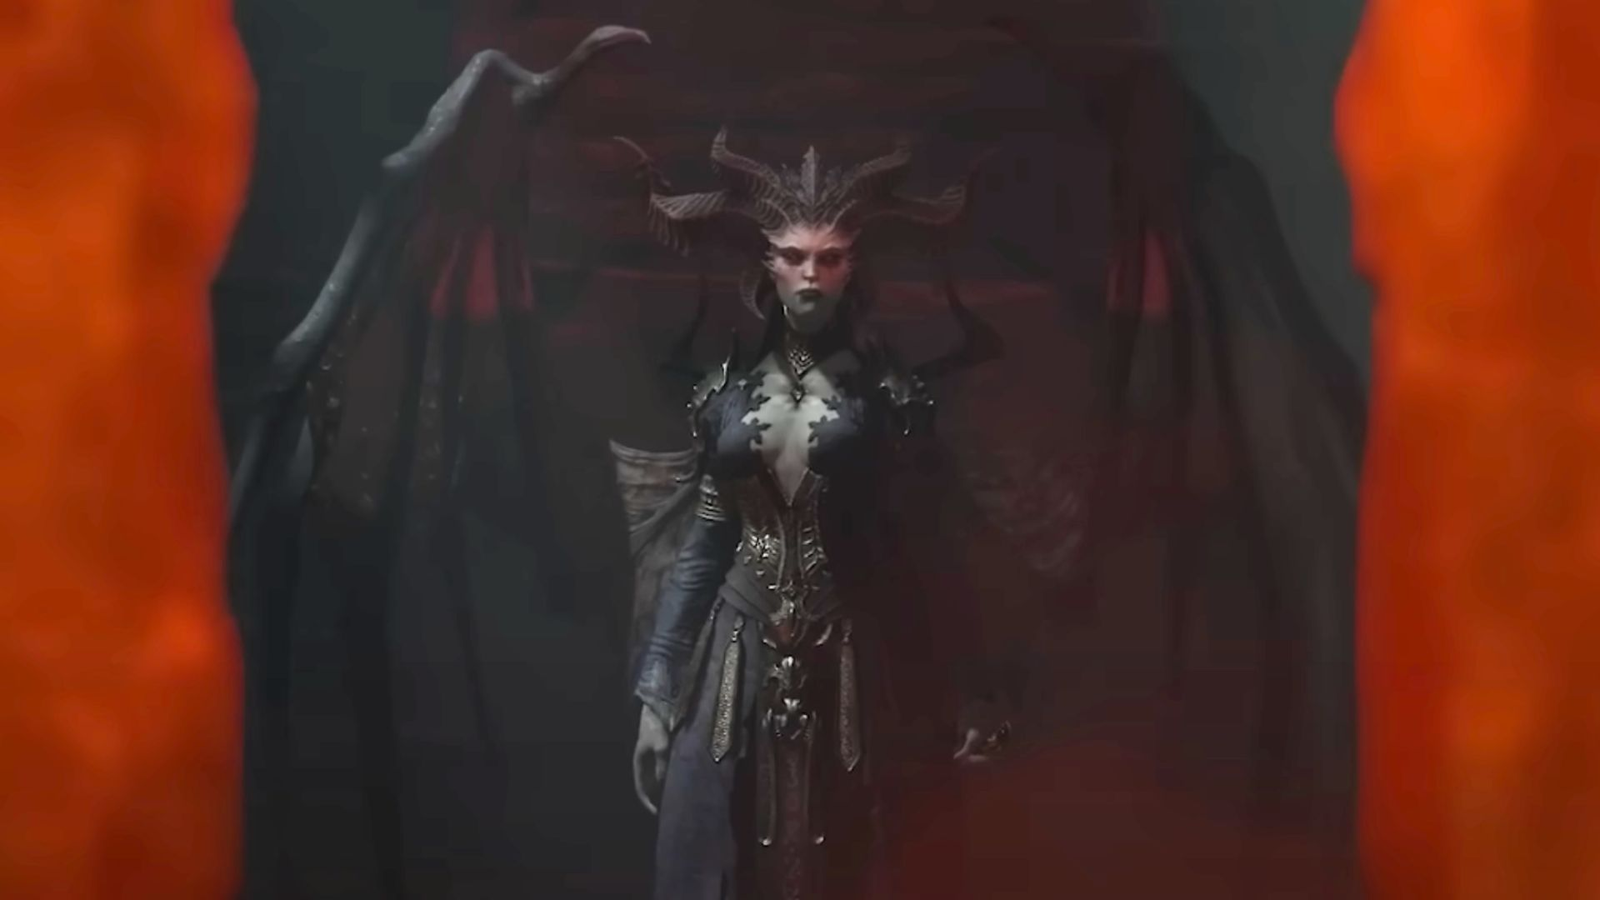 Diablo IV adds PS5 and Xbox Series versions, launches in 2023